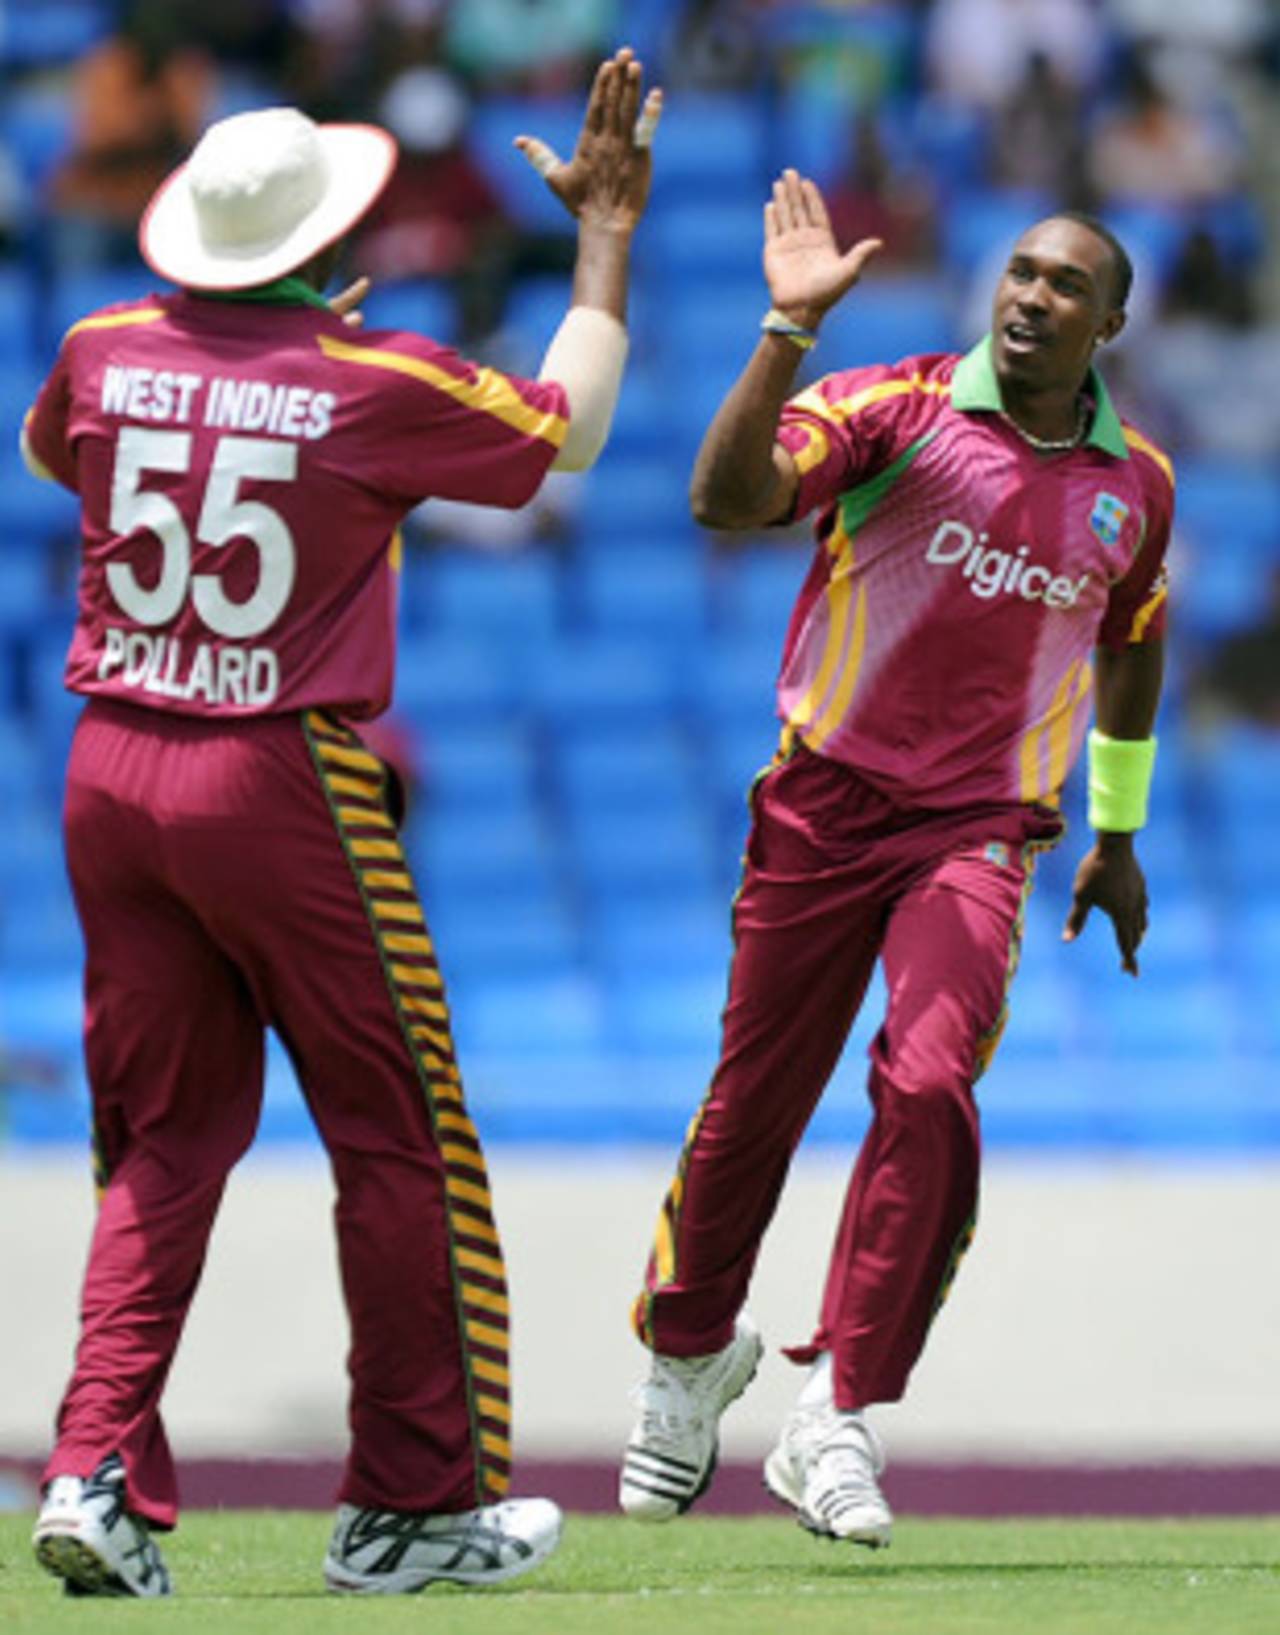 West Indies cricket fans may not get to see Dwayne Bravo and Kieron Pollard in a West Indies uniform very often in the future&nbsp;&nbsp;&bull;&nbsp;&nbsp;AFP